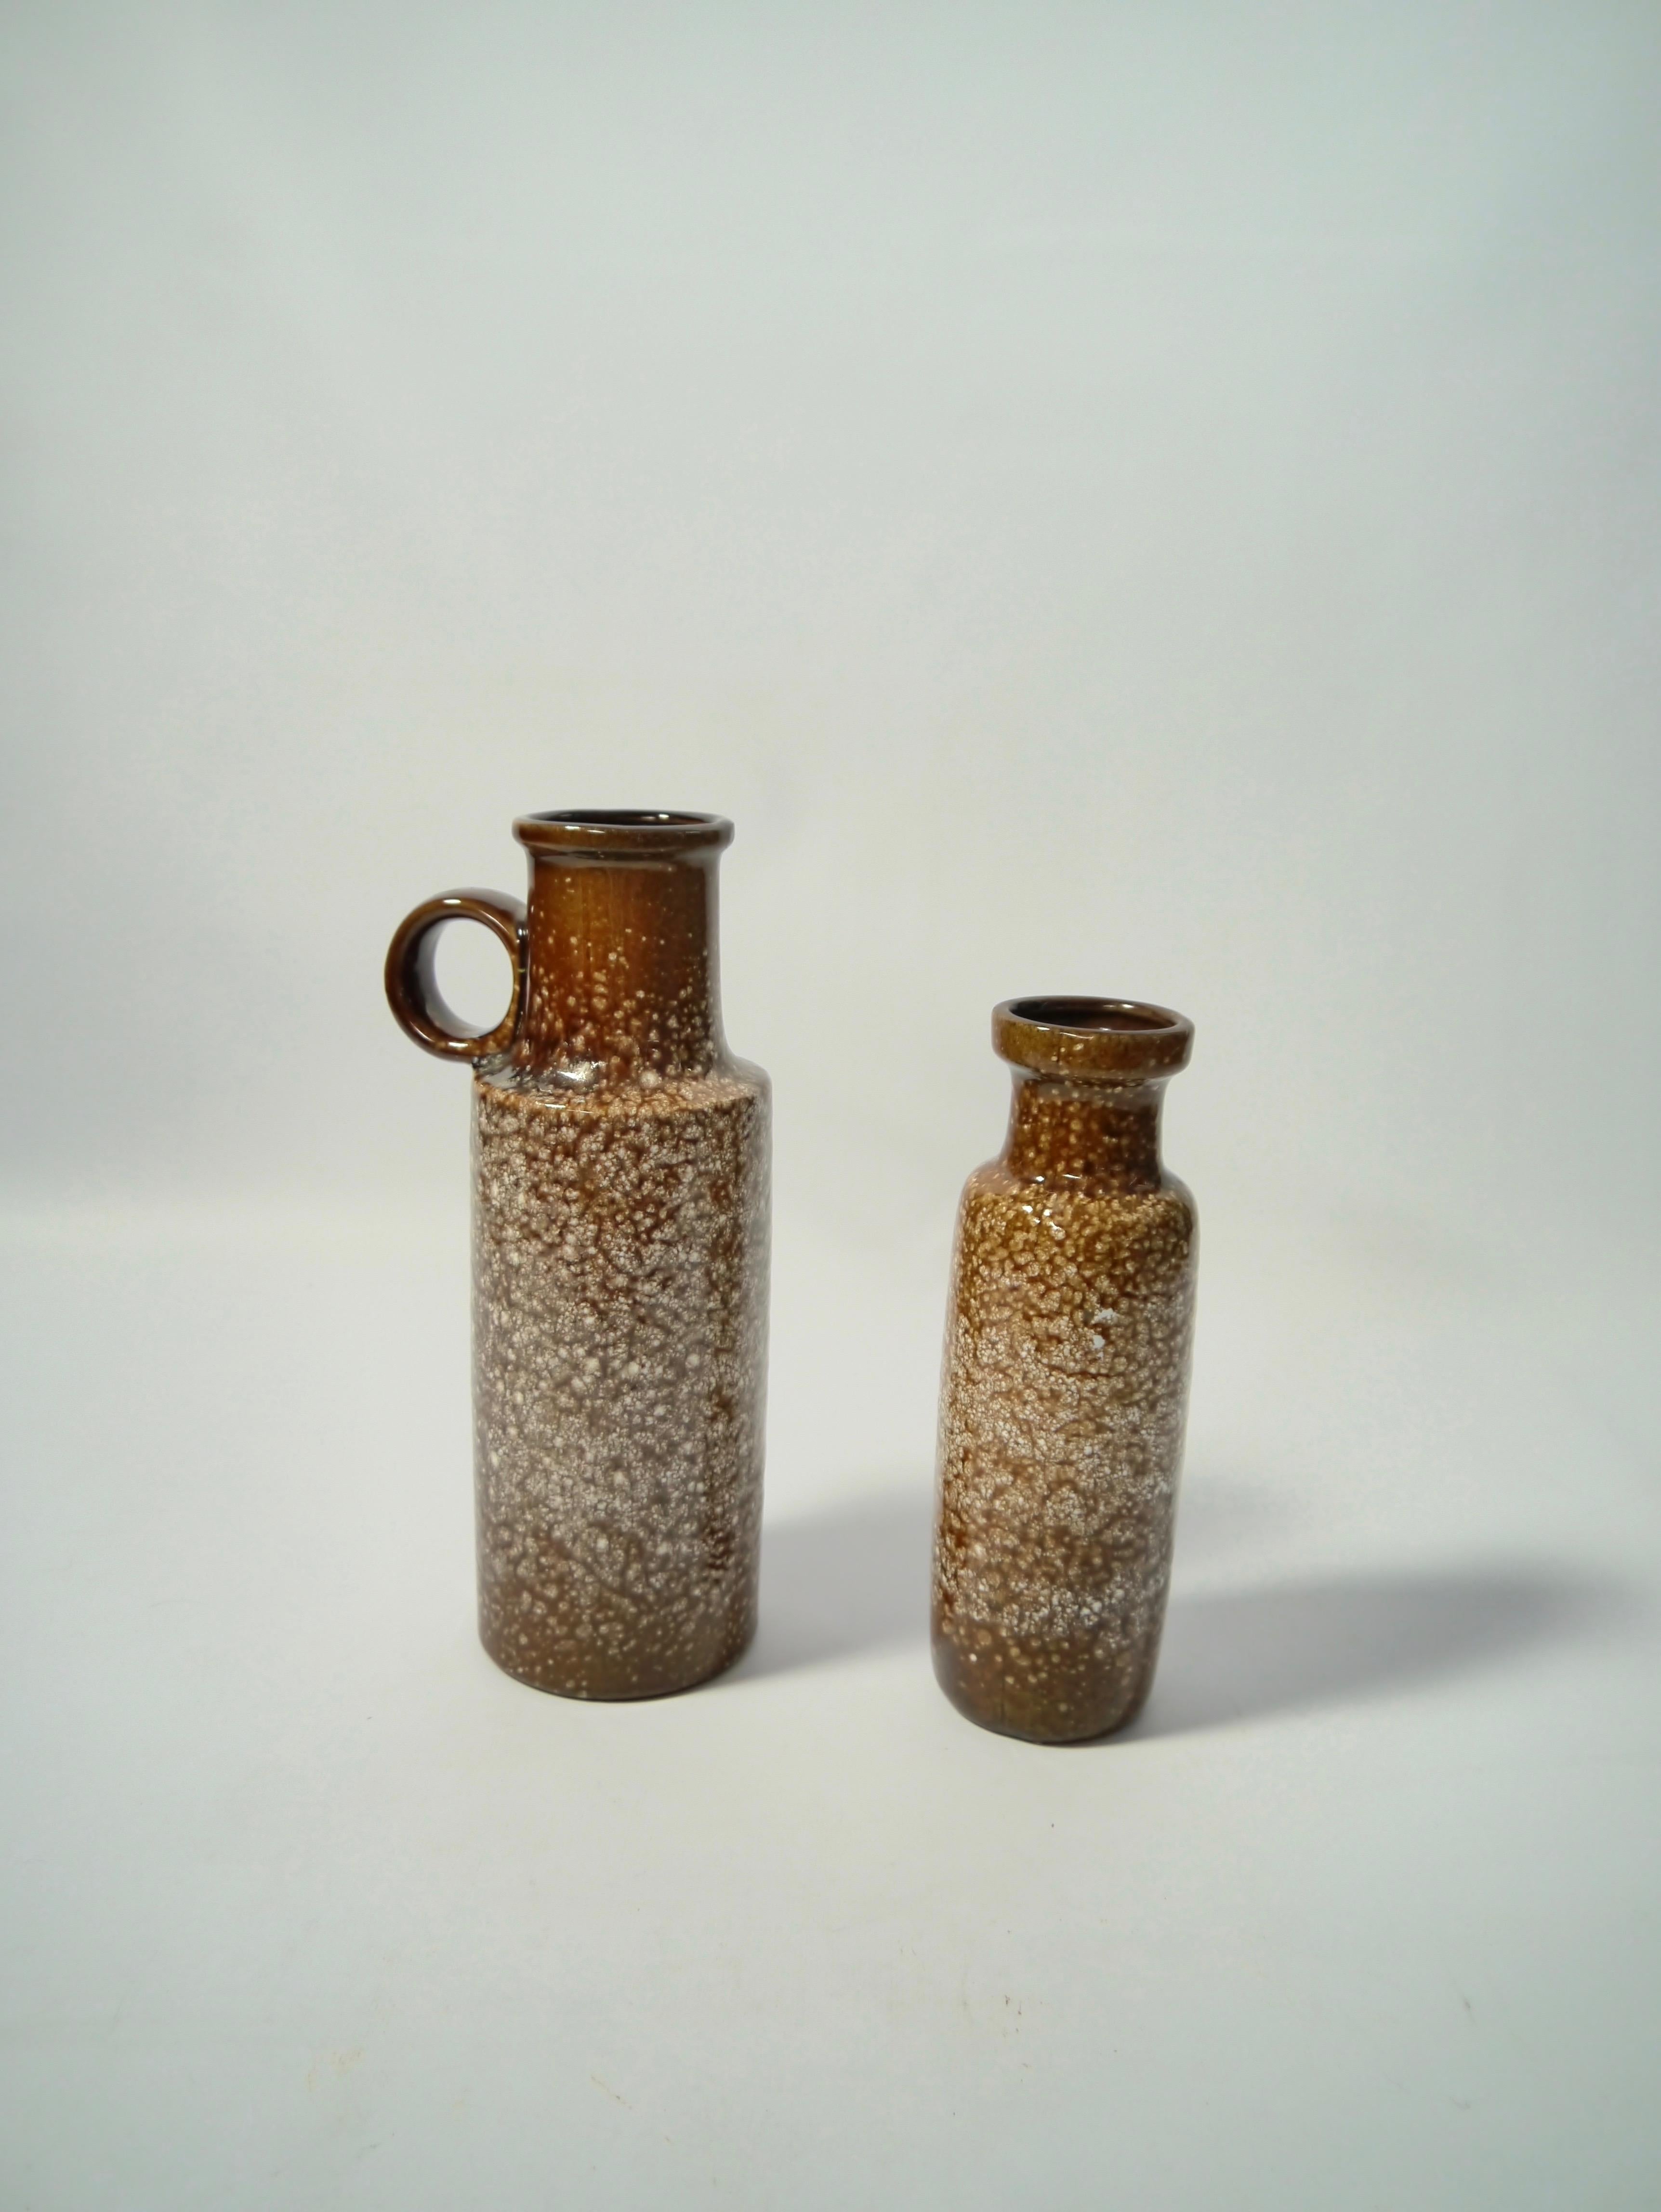 Pair of brown & white speckled glazed ceramic vases fabricated by BAY, West Germany, 1960s.